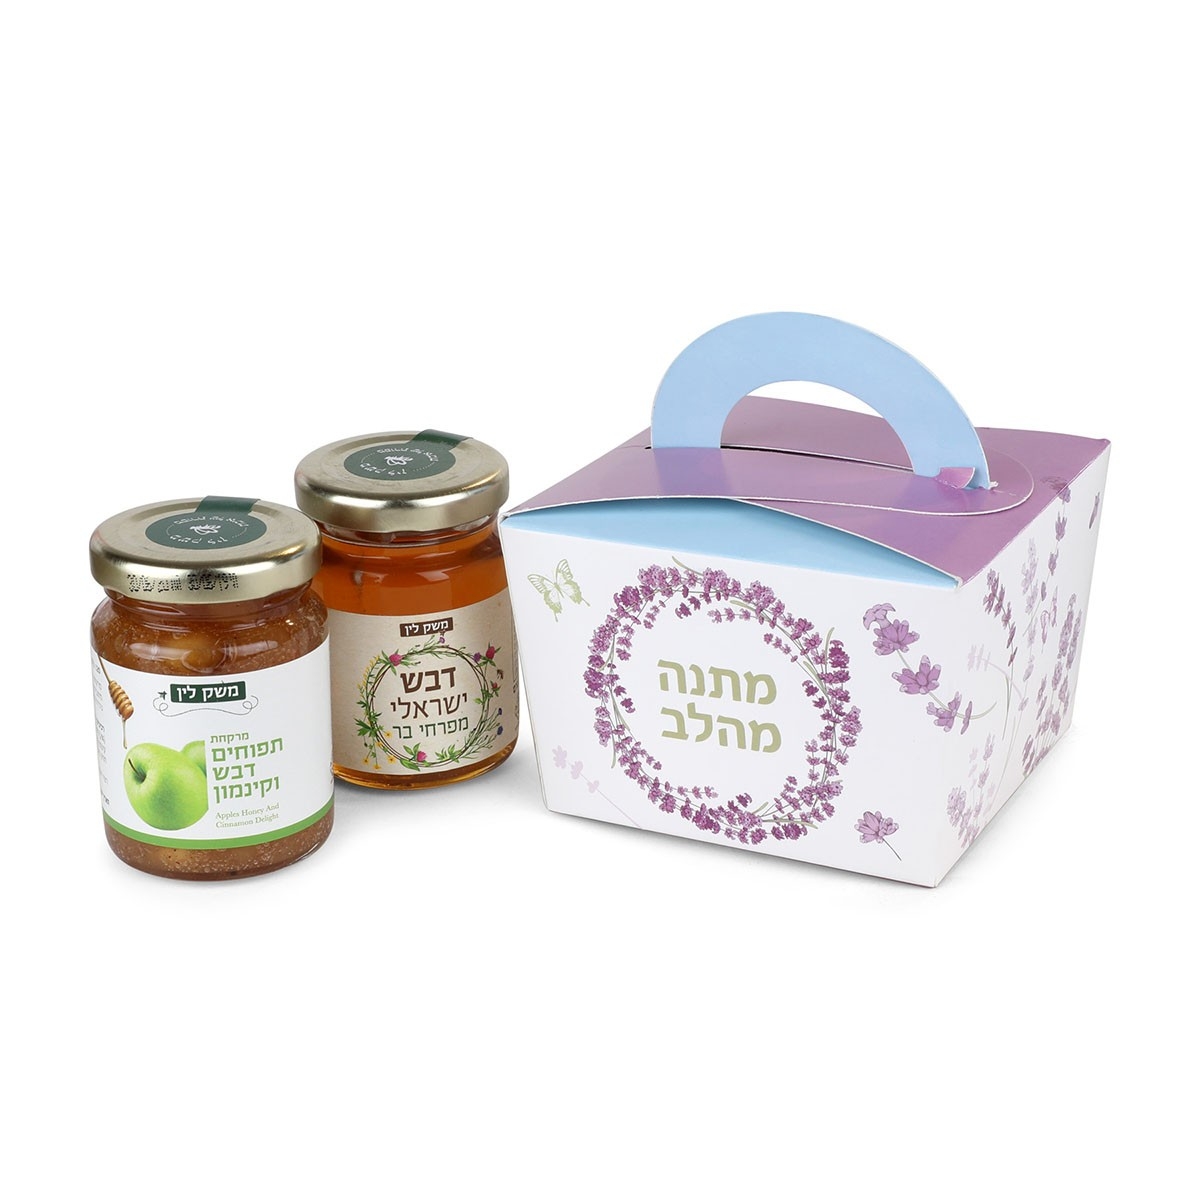 All-natural Honey Gift Box from Lin's Farm - 1